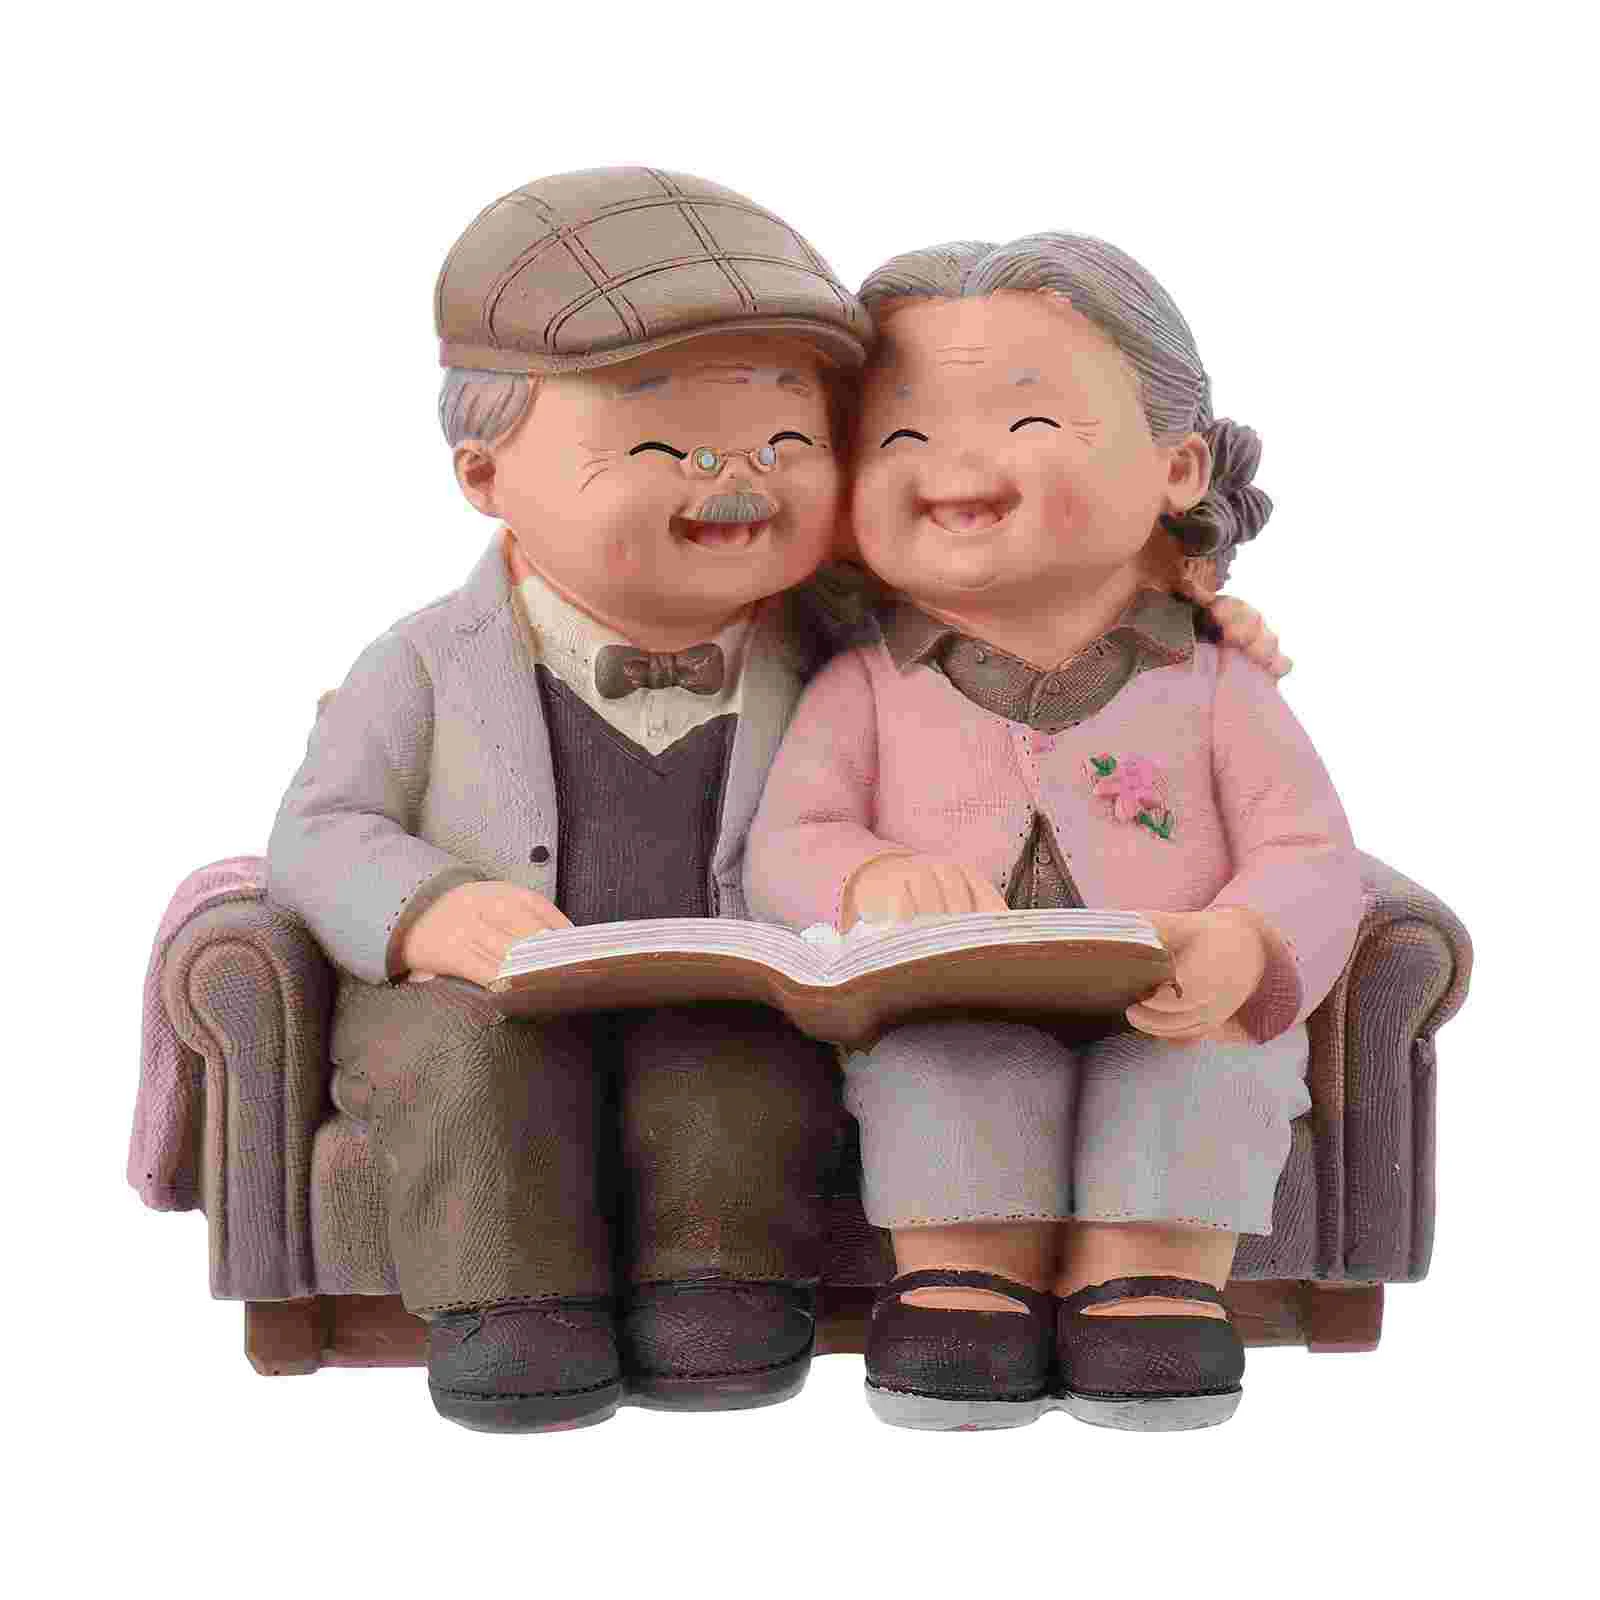 

Couple Figurines Figurine Elderly Grandparents Statue Anniversary Resin Old Lover Wedding Day Gifts Lovers Crafts Grandma